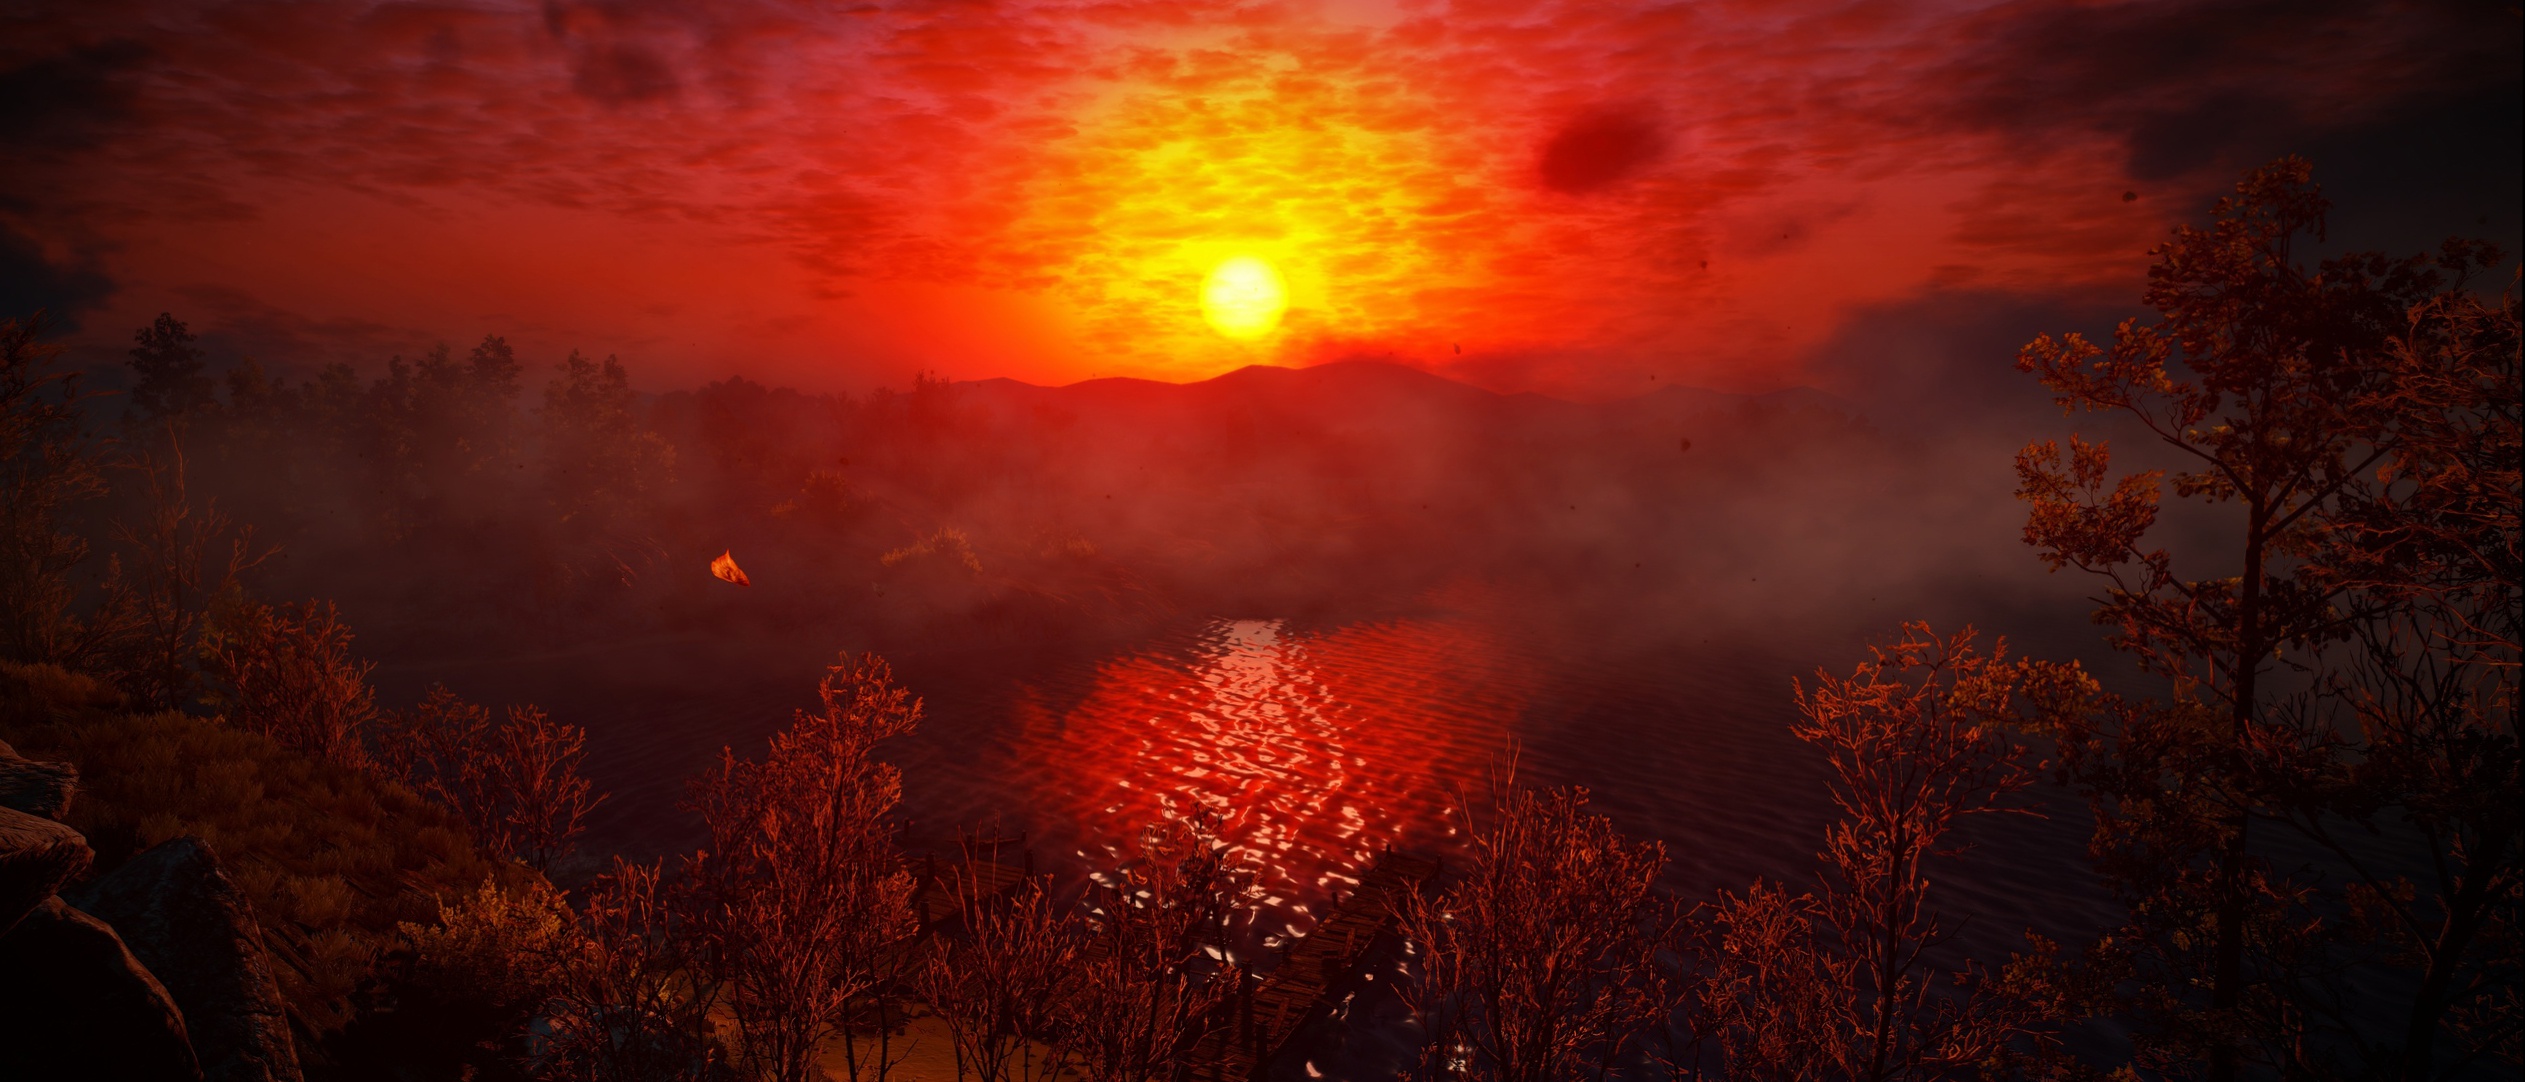 General 2525x1082 CD Projekt RED sunset orange sky lake screen shot The Witcher The Witcher 3: Wild Hunt